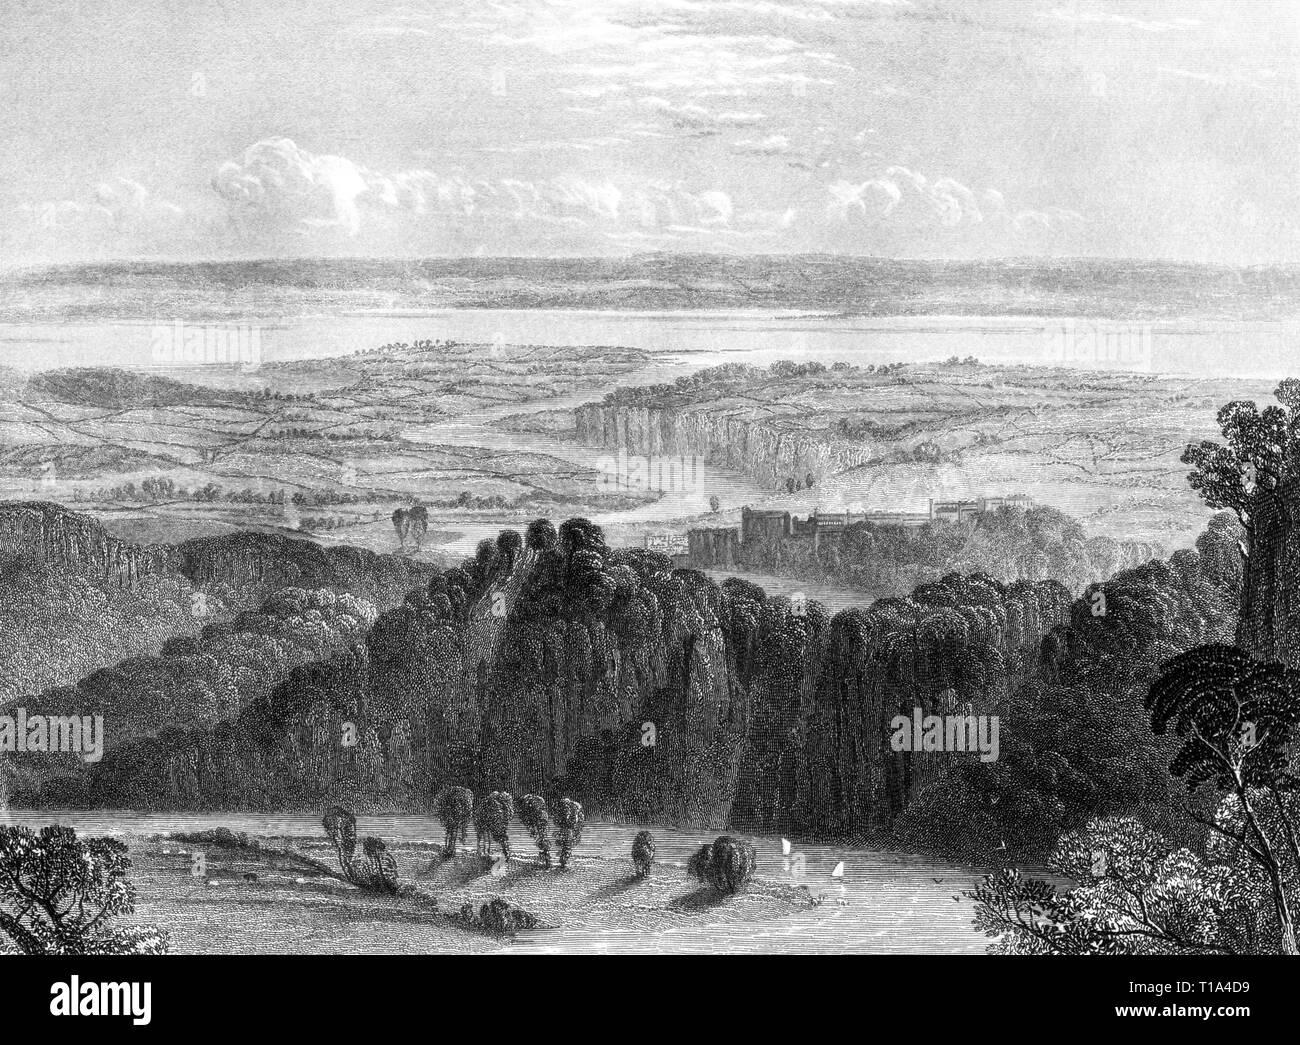 Engraving of the View from Windcliff (Wynd Cliff) in the Wye Valley, Monmouthshire, Wales UK scanned at high resolution from a book published in 1825. Stock Photo